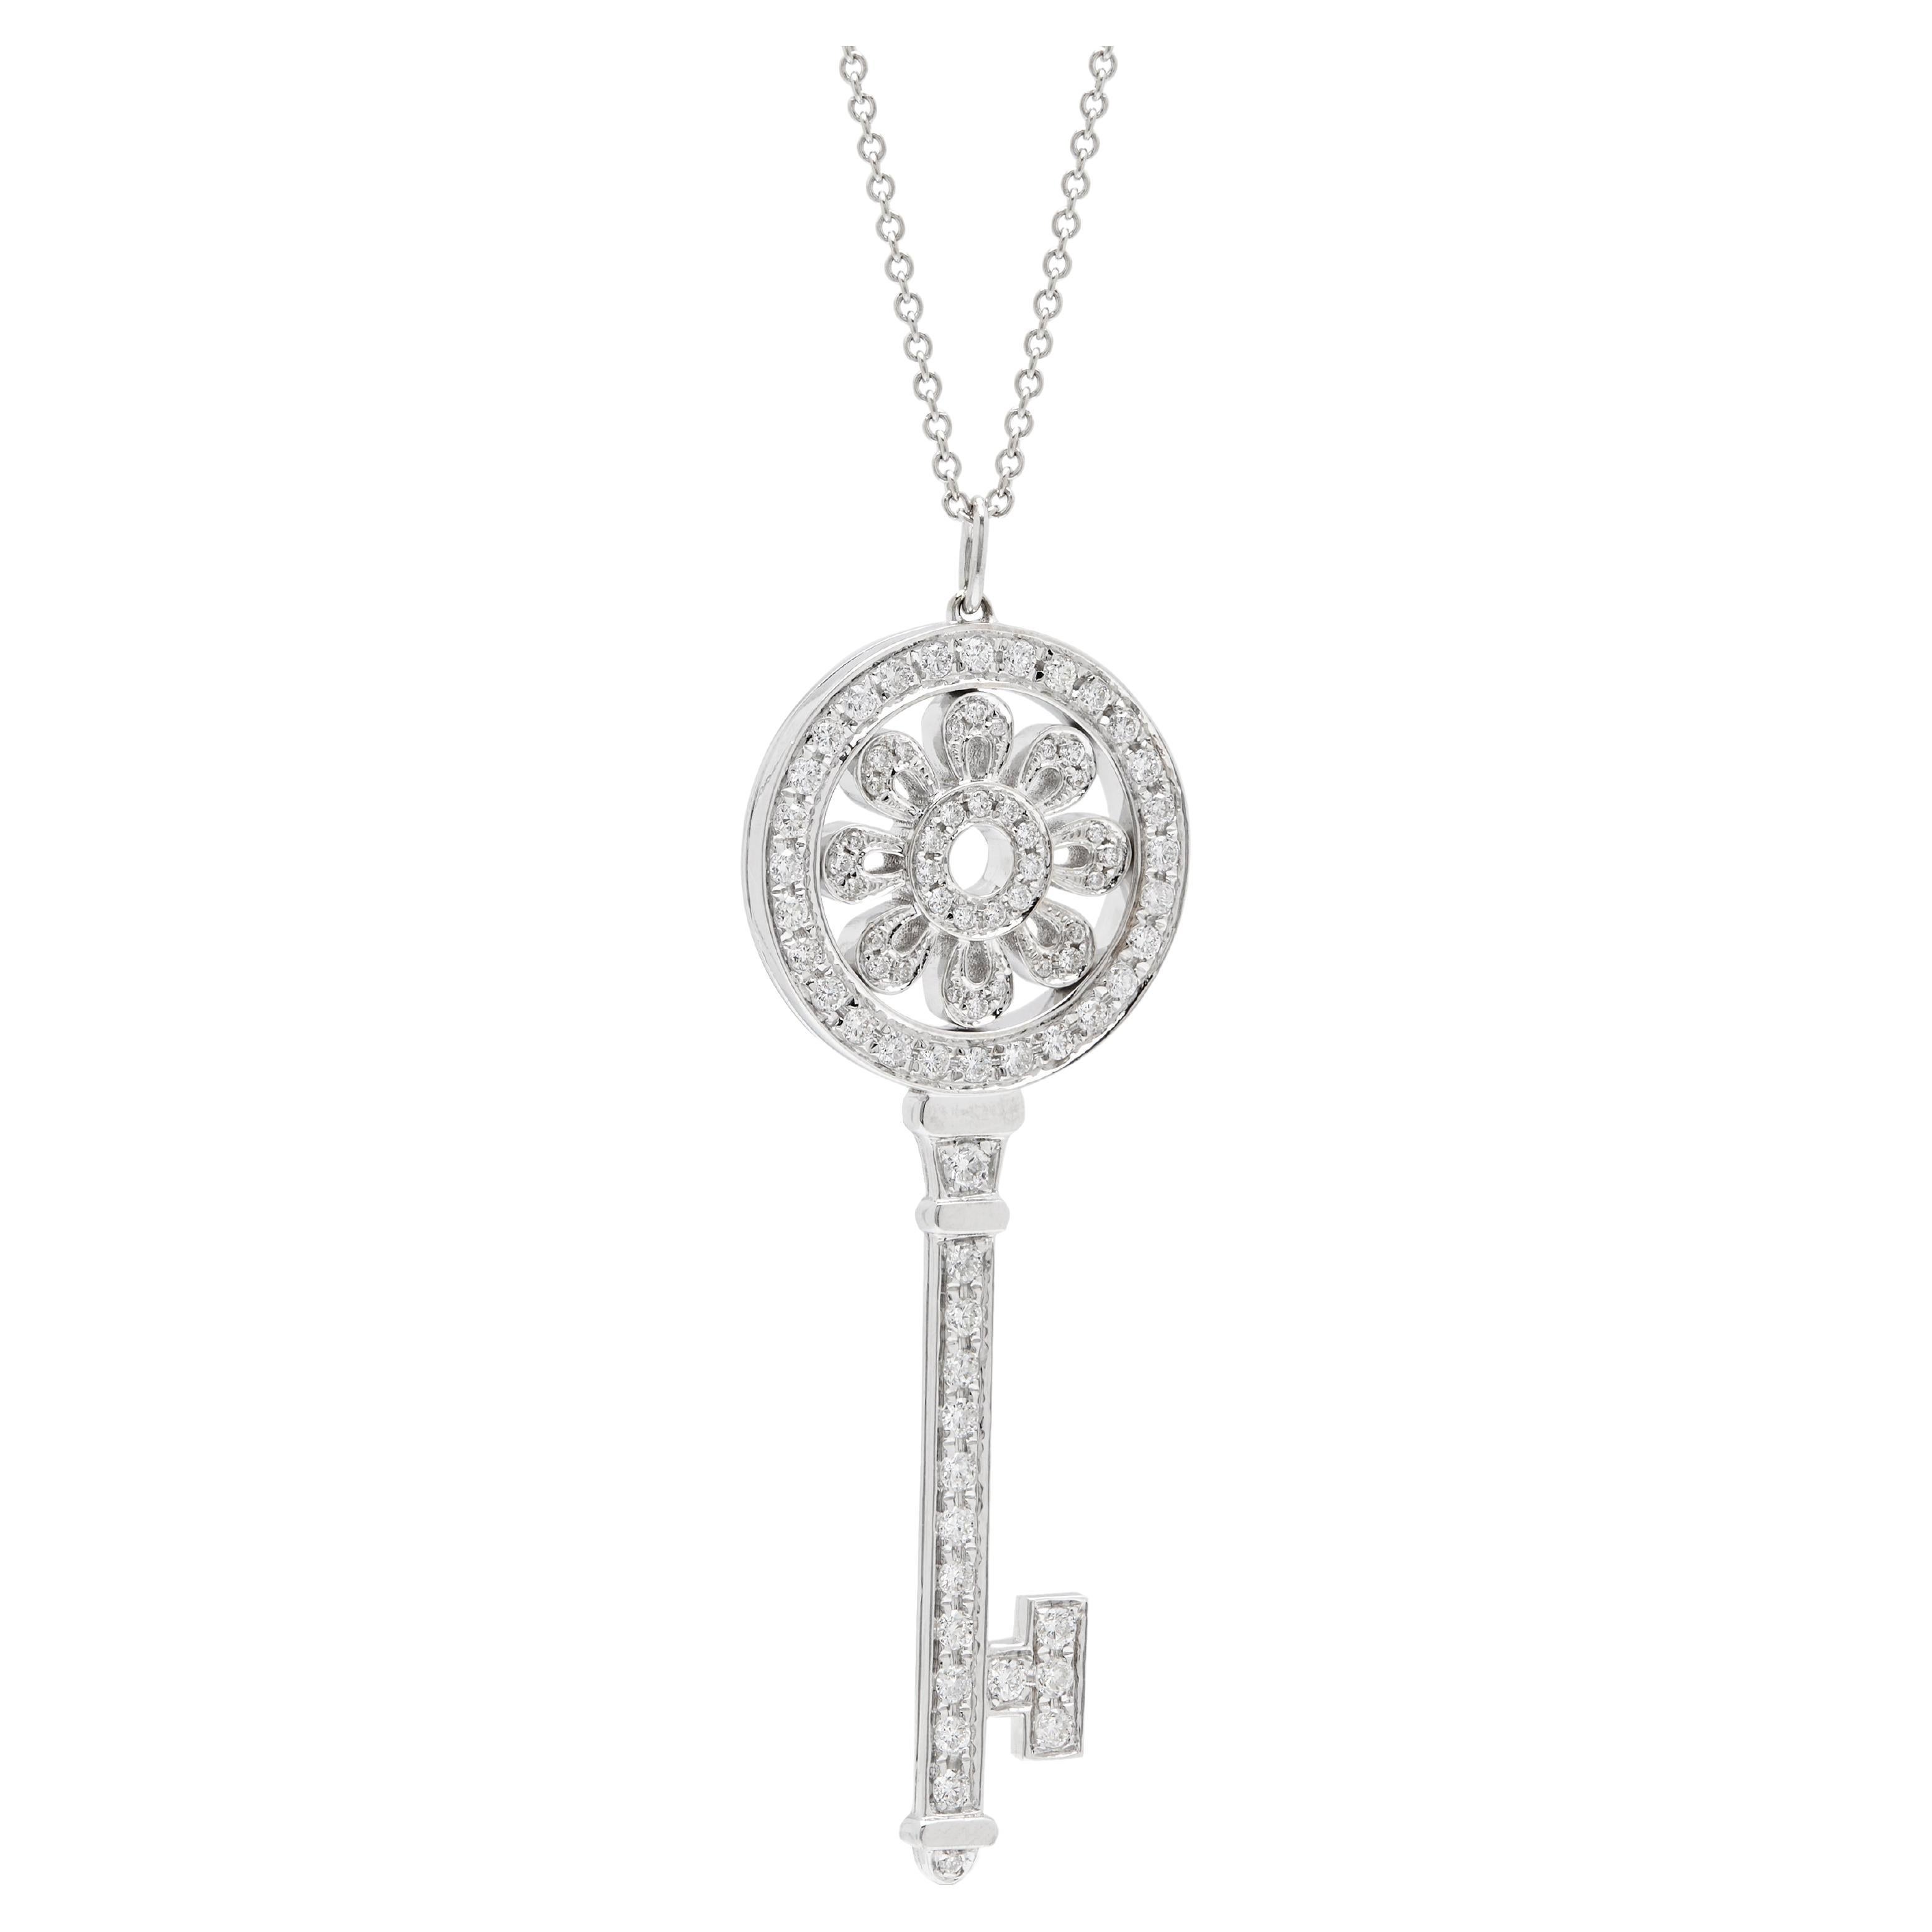 Tiffany white gold diamond large petal key pendant and chain.  For Sale